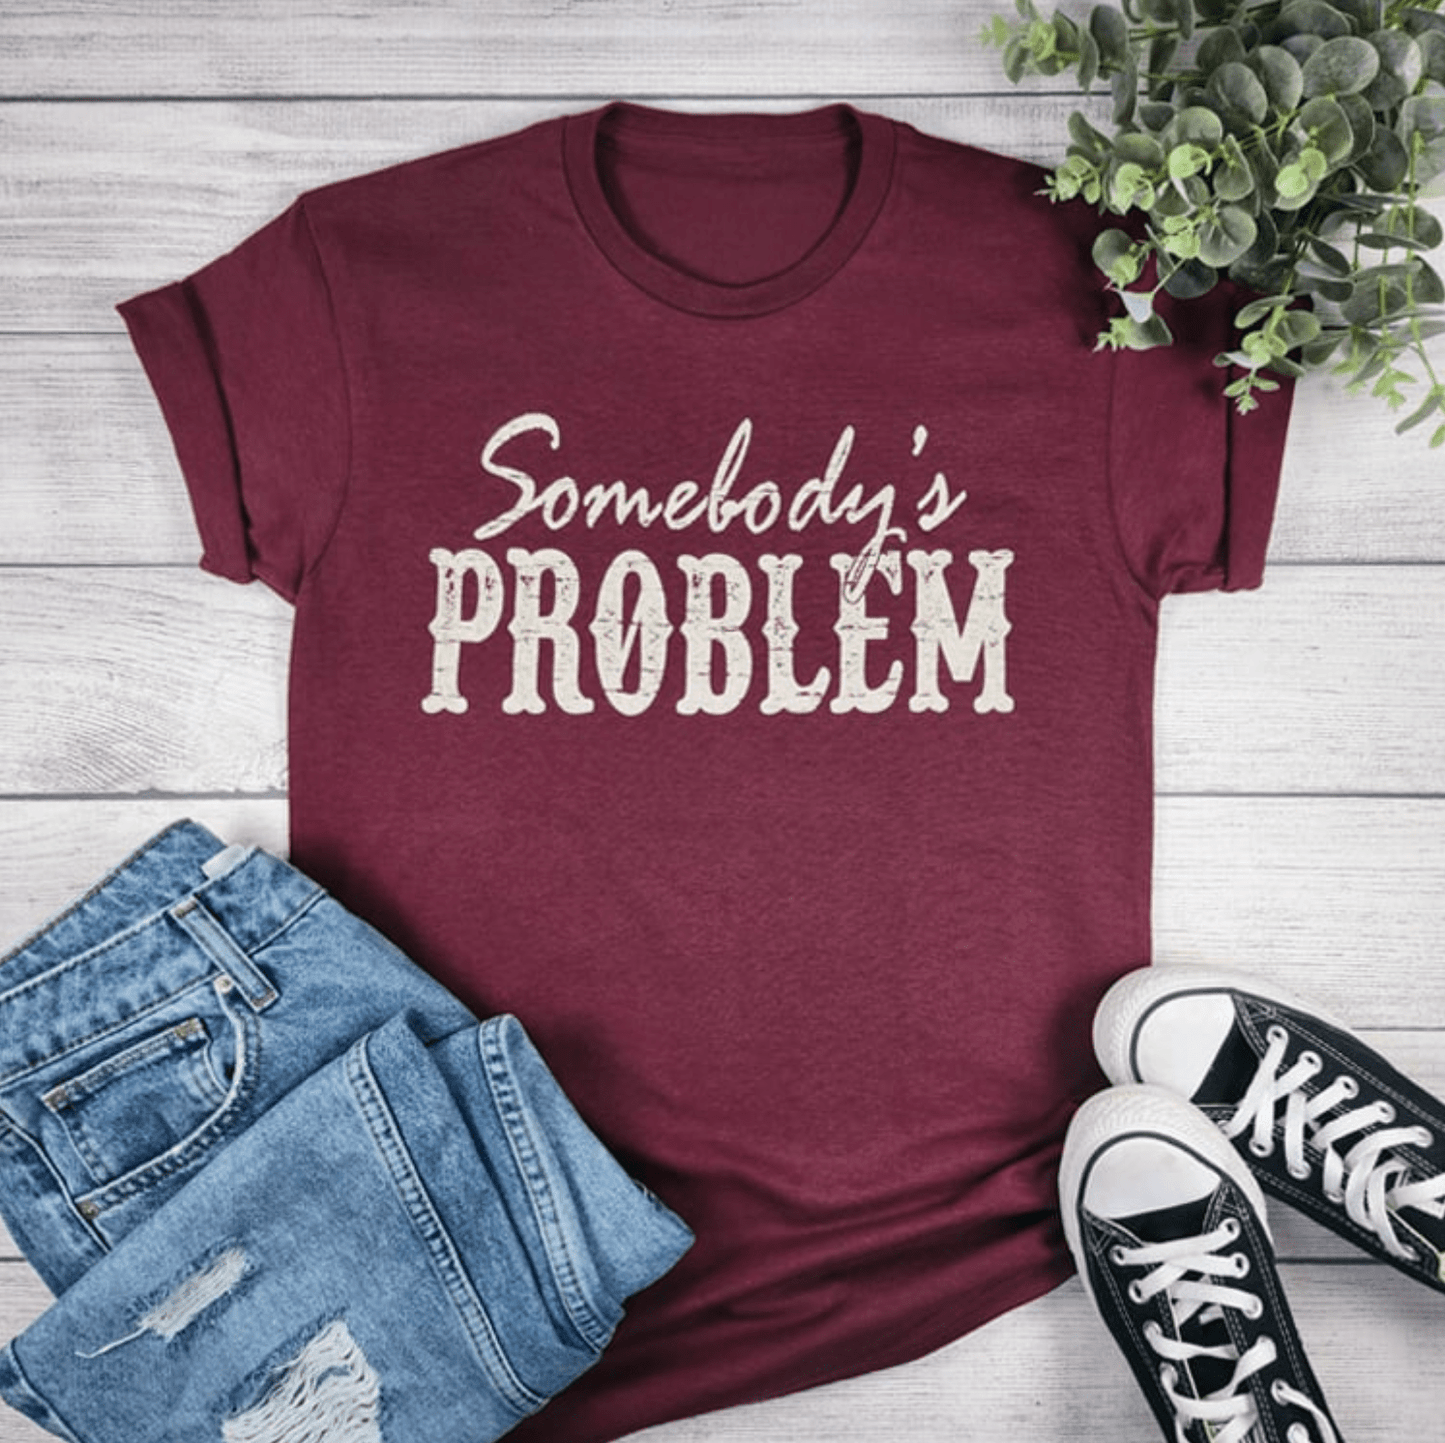 Envy Stylz Boutique Women - Apparel - Shirts - T-Shirts Somebody's Problem Graphic Tee